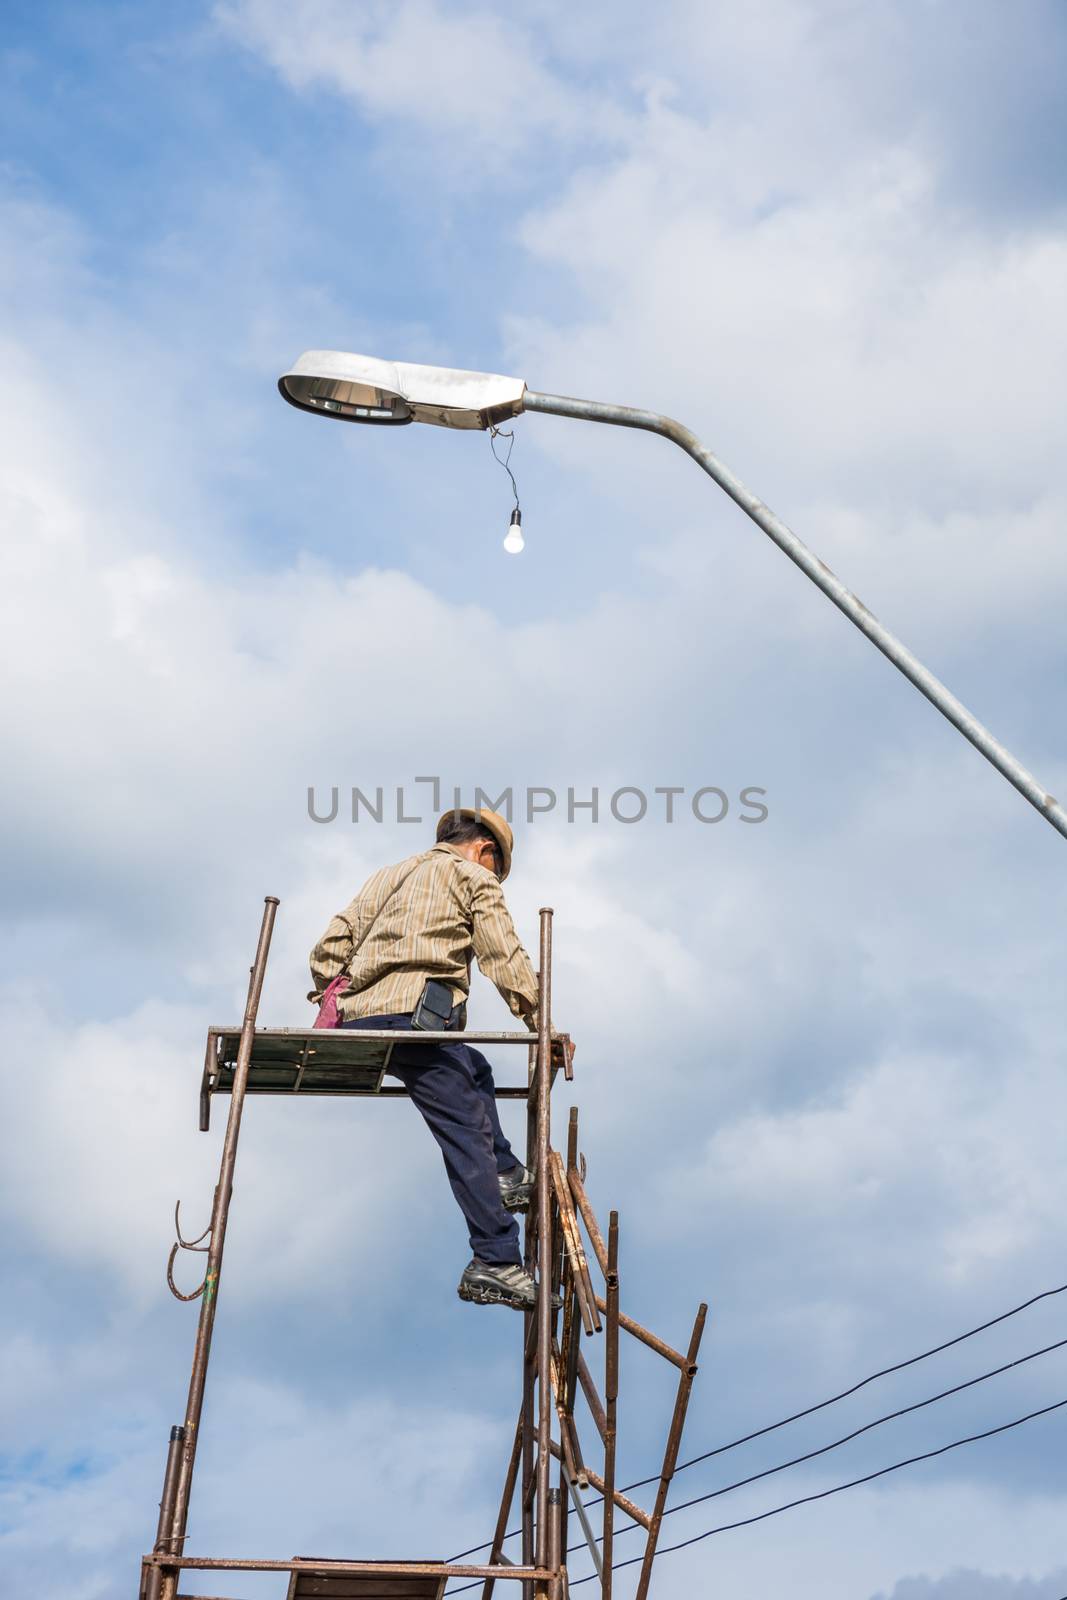 Bangkok, Thailand - June 26, 2016 : Unidentified worker working to install electric line by scaffolding on pickup truck at Bangkok Thailand.